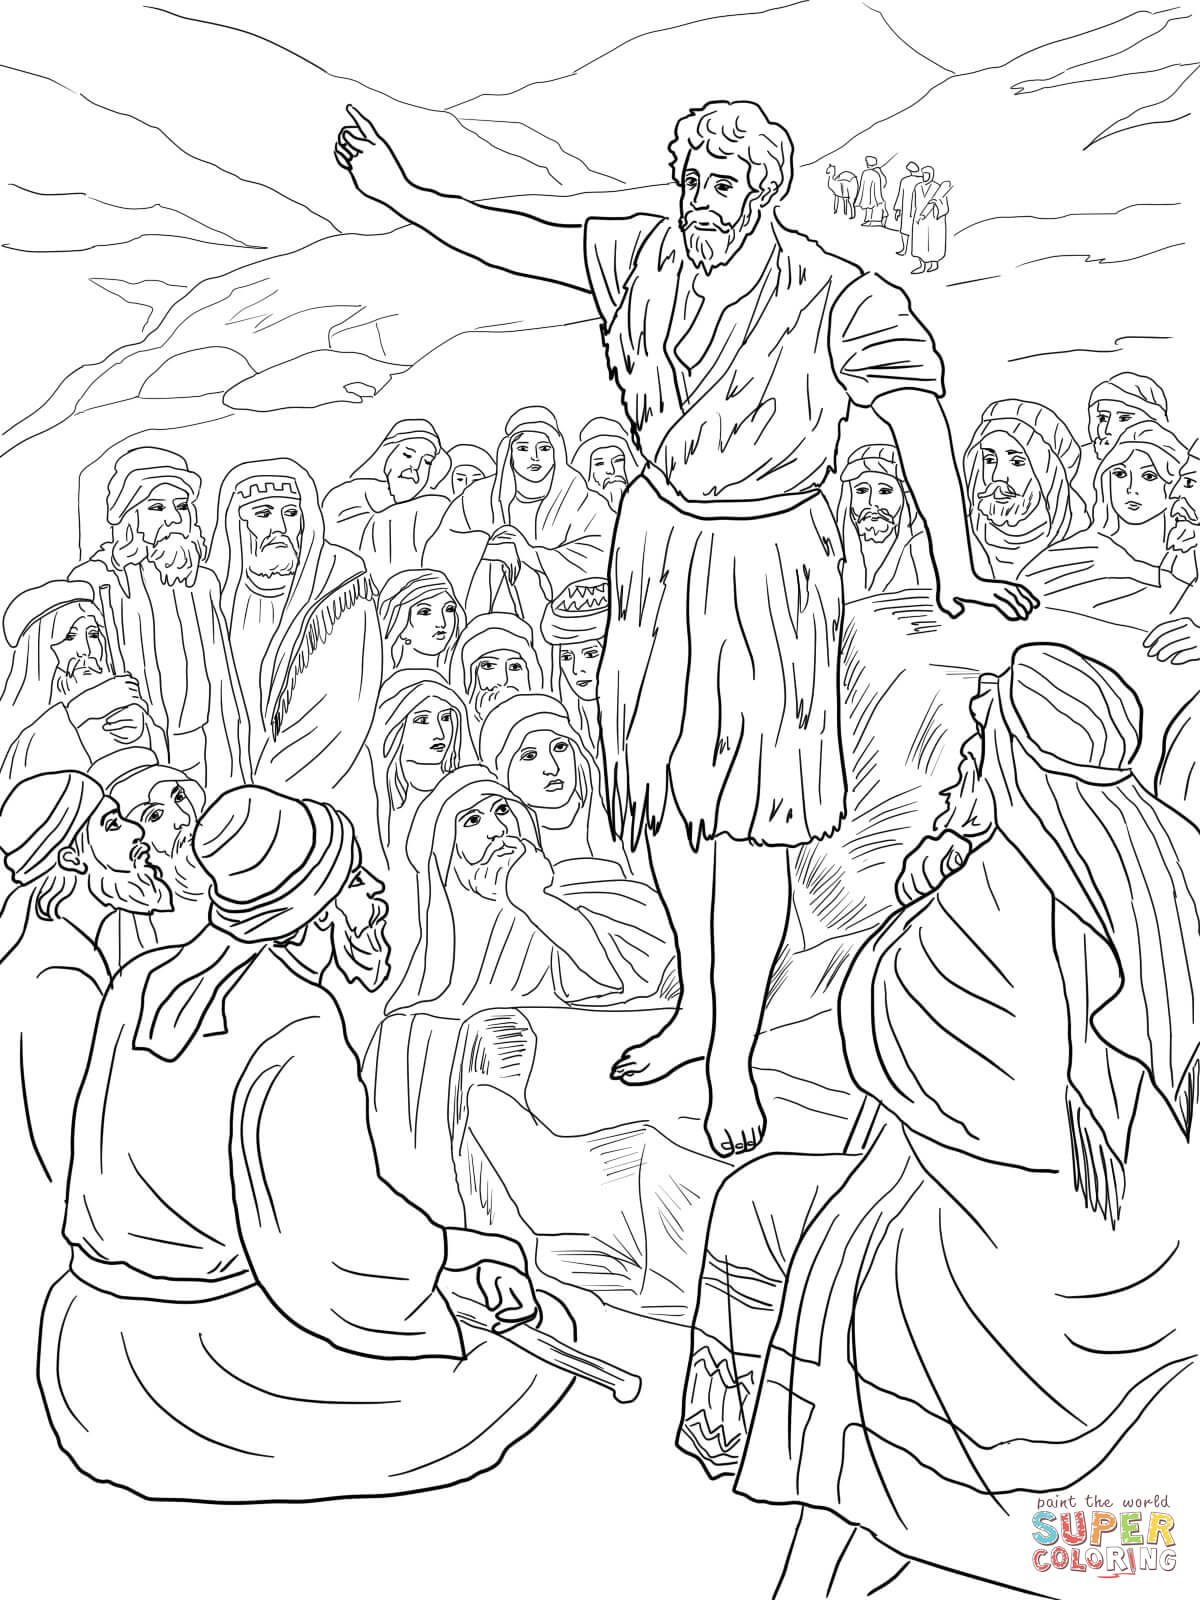 John the baptist preaching in the wilderness coloring page free printable coloring pages